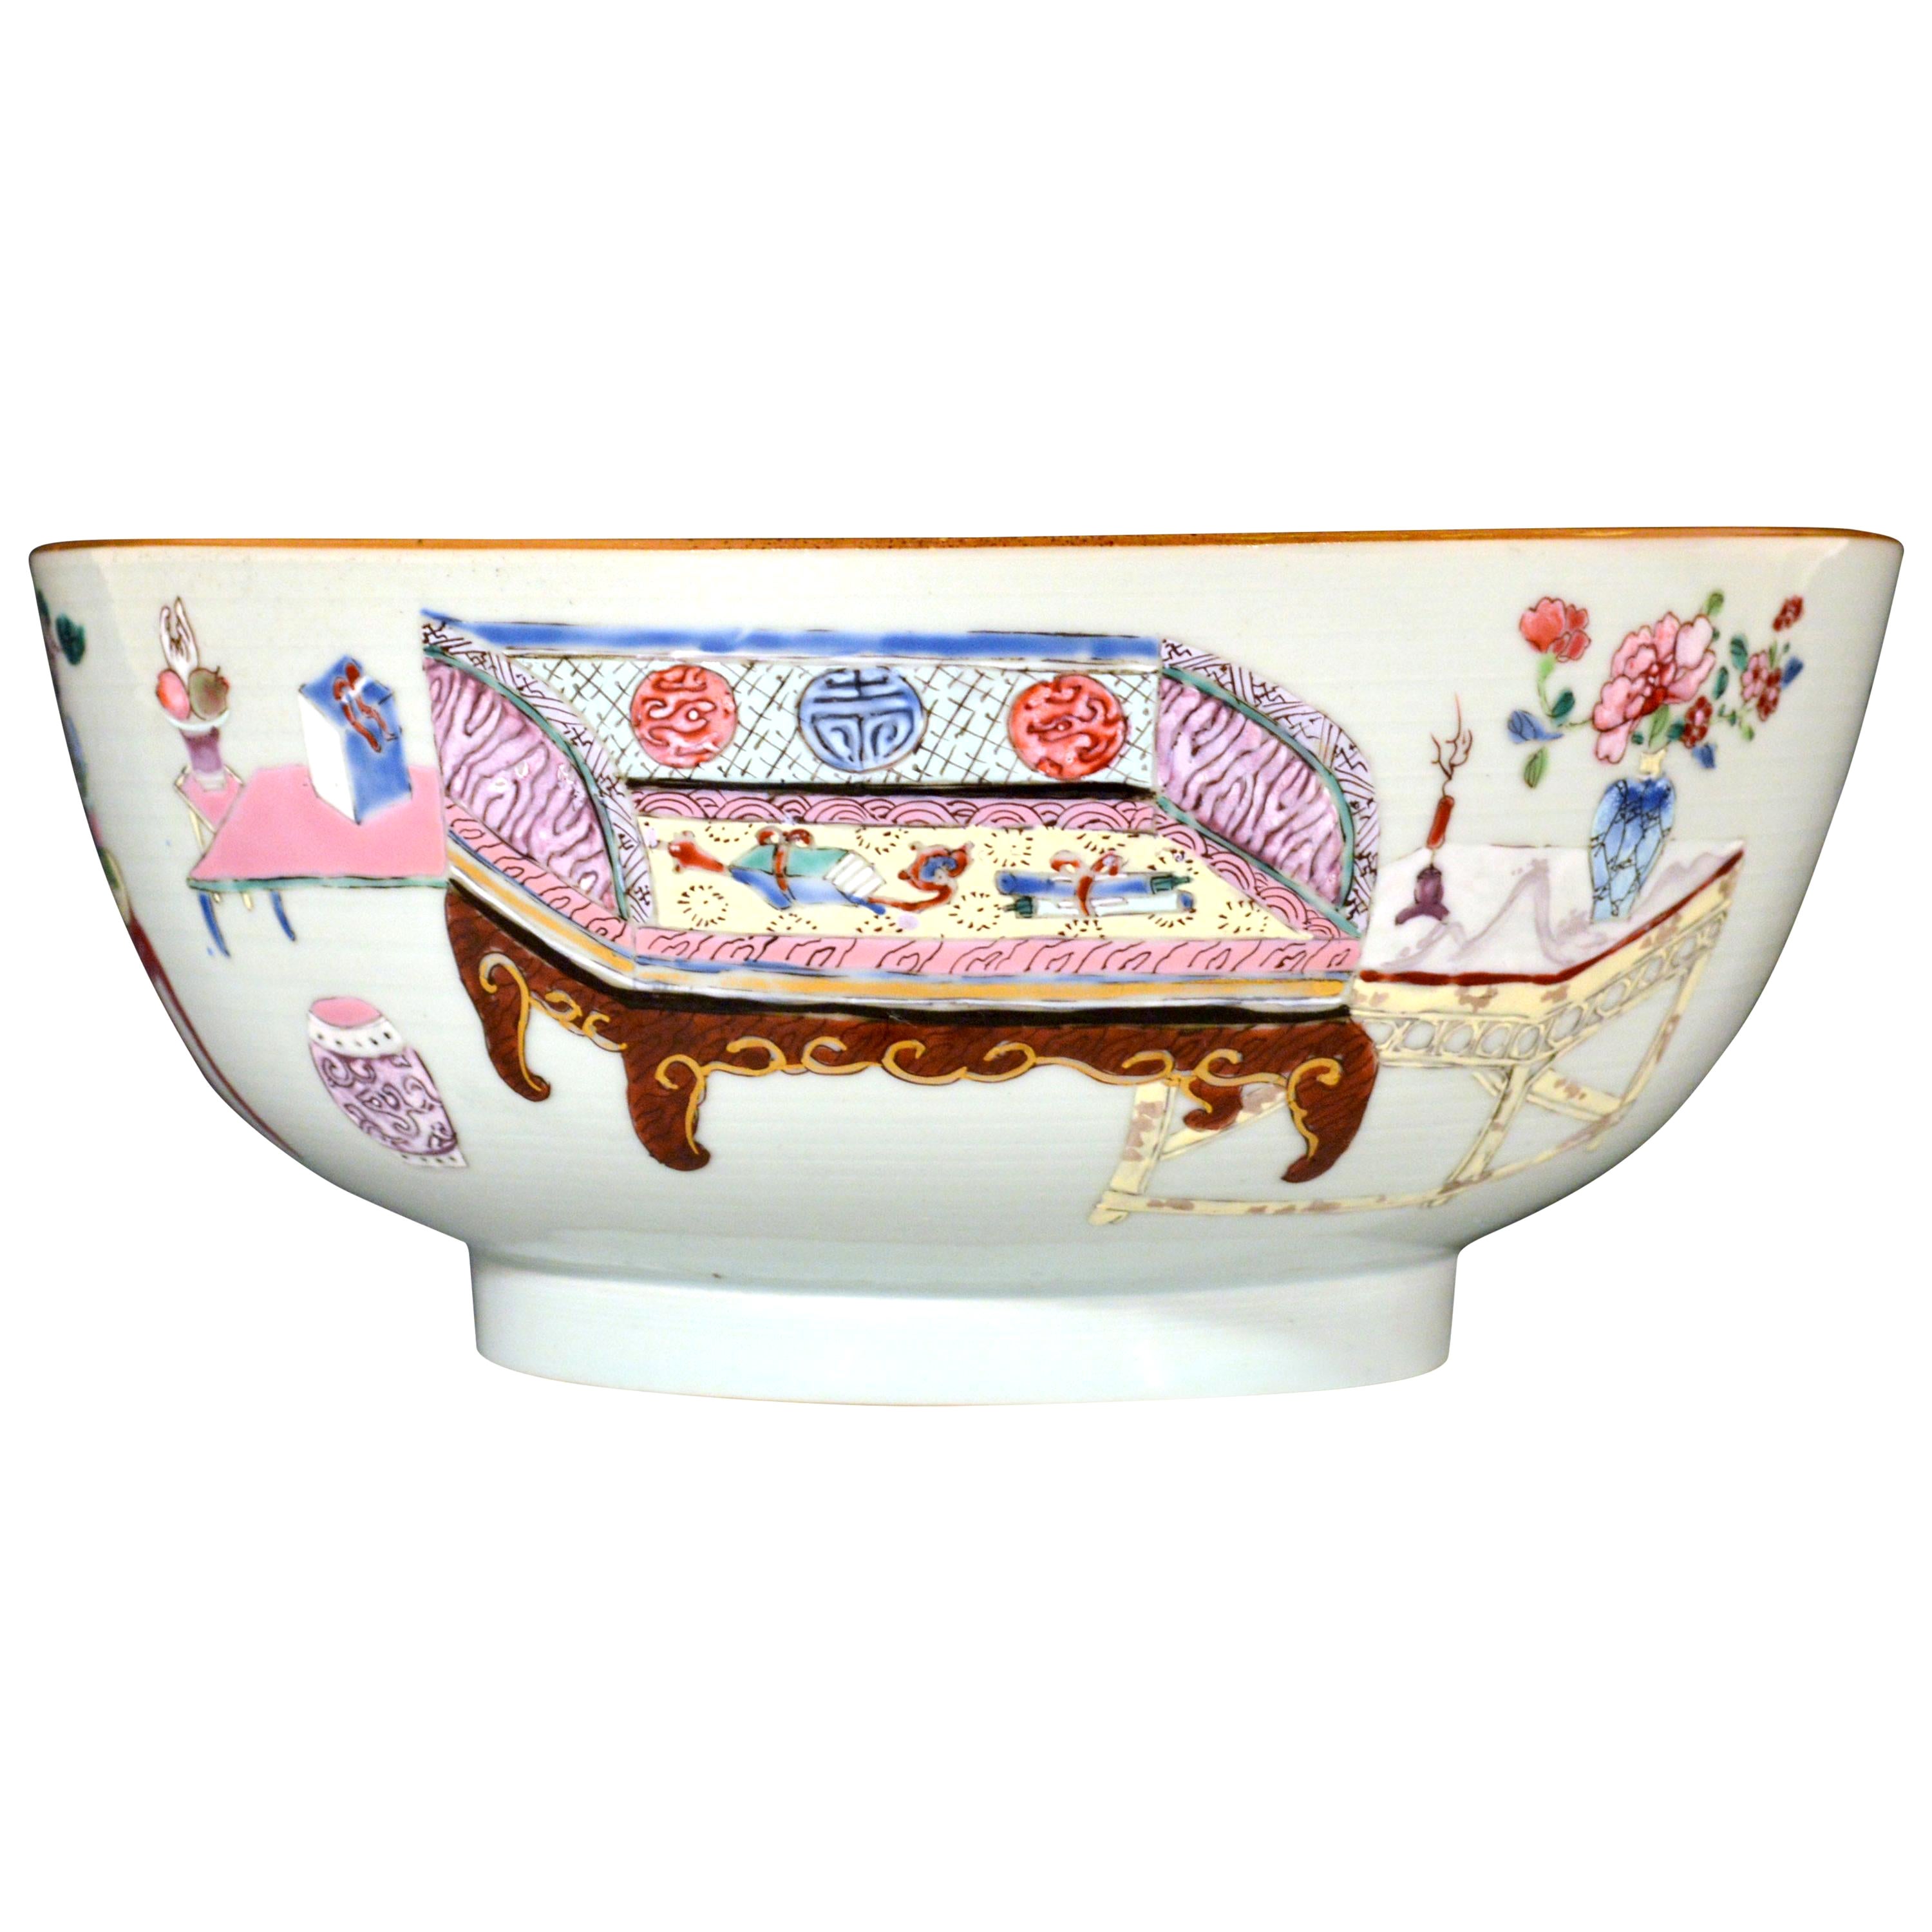 18th Century Chinese Export Porcelain Bowl with Chinese Domestic Furniture